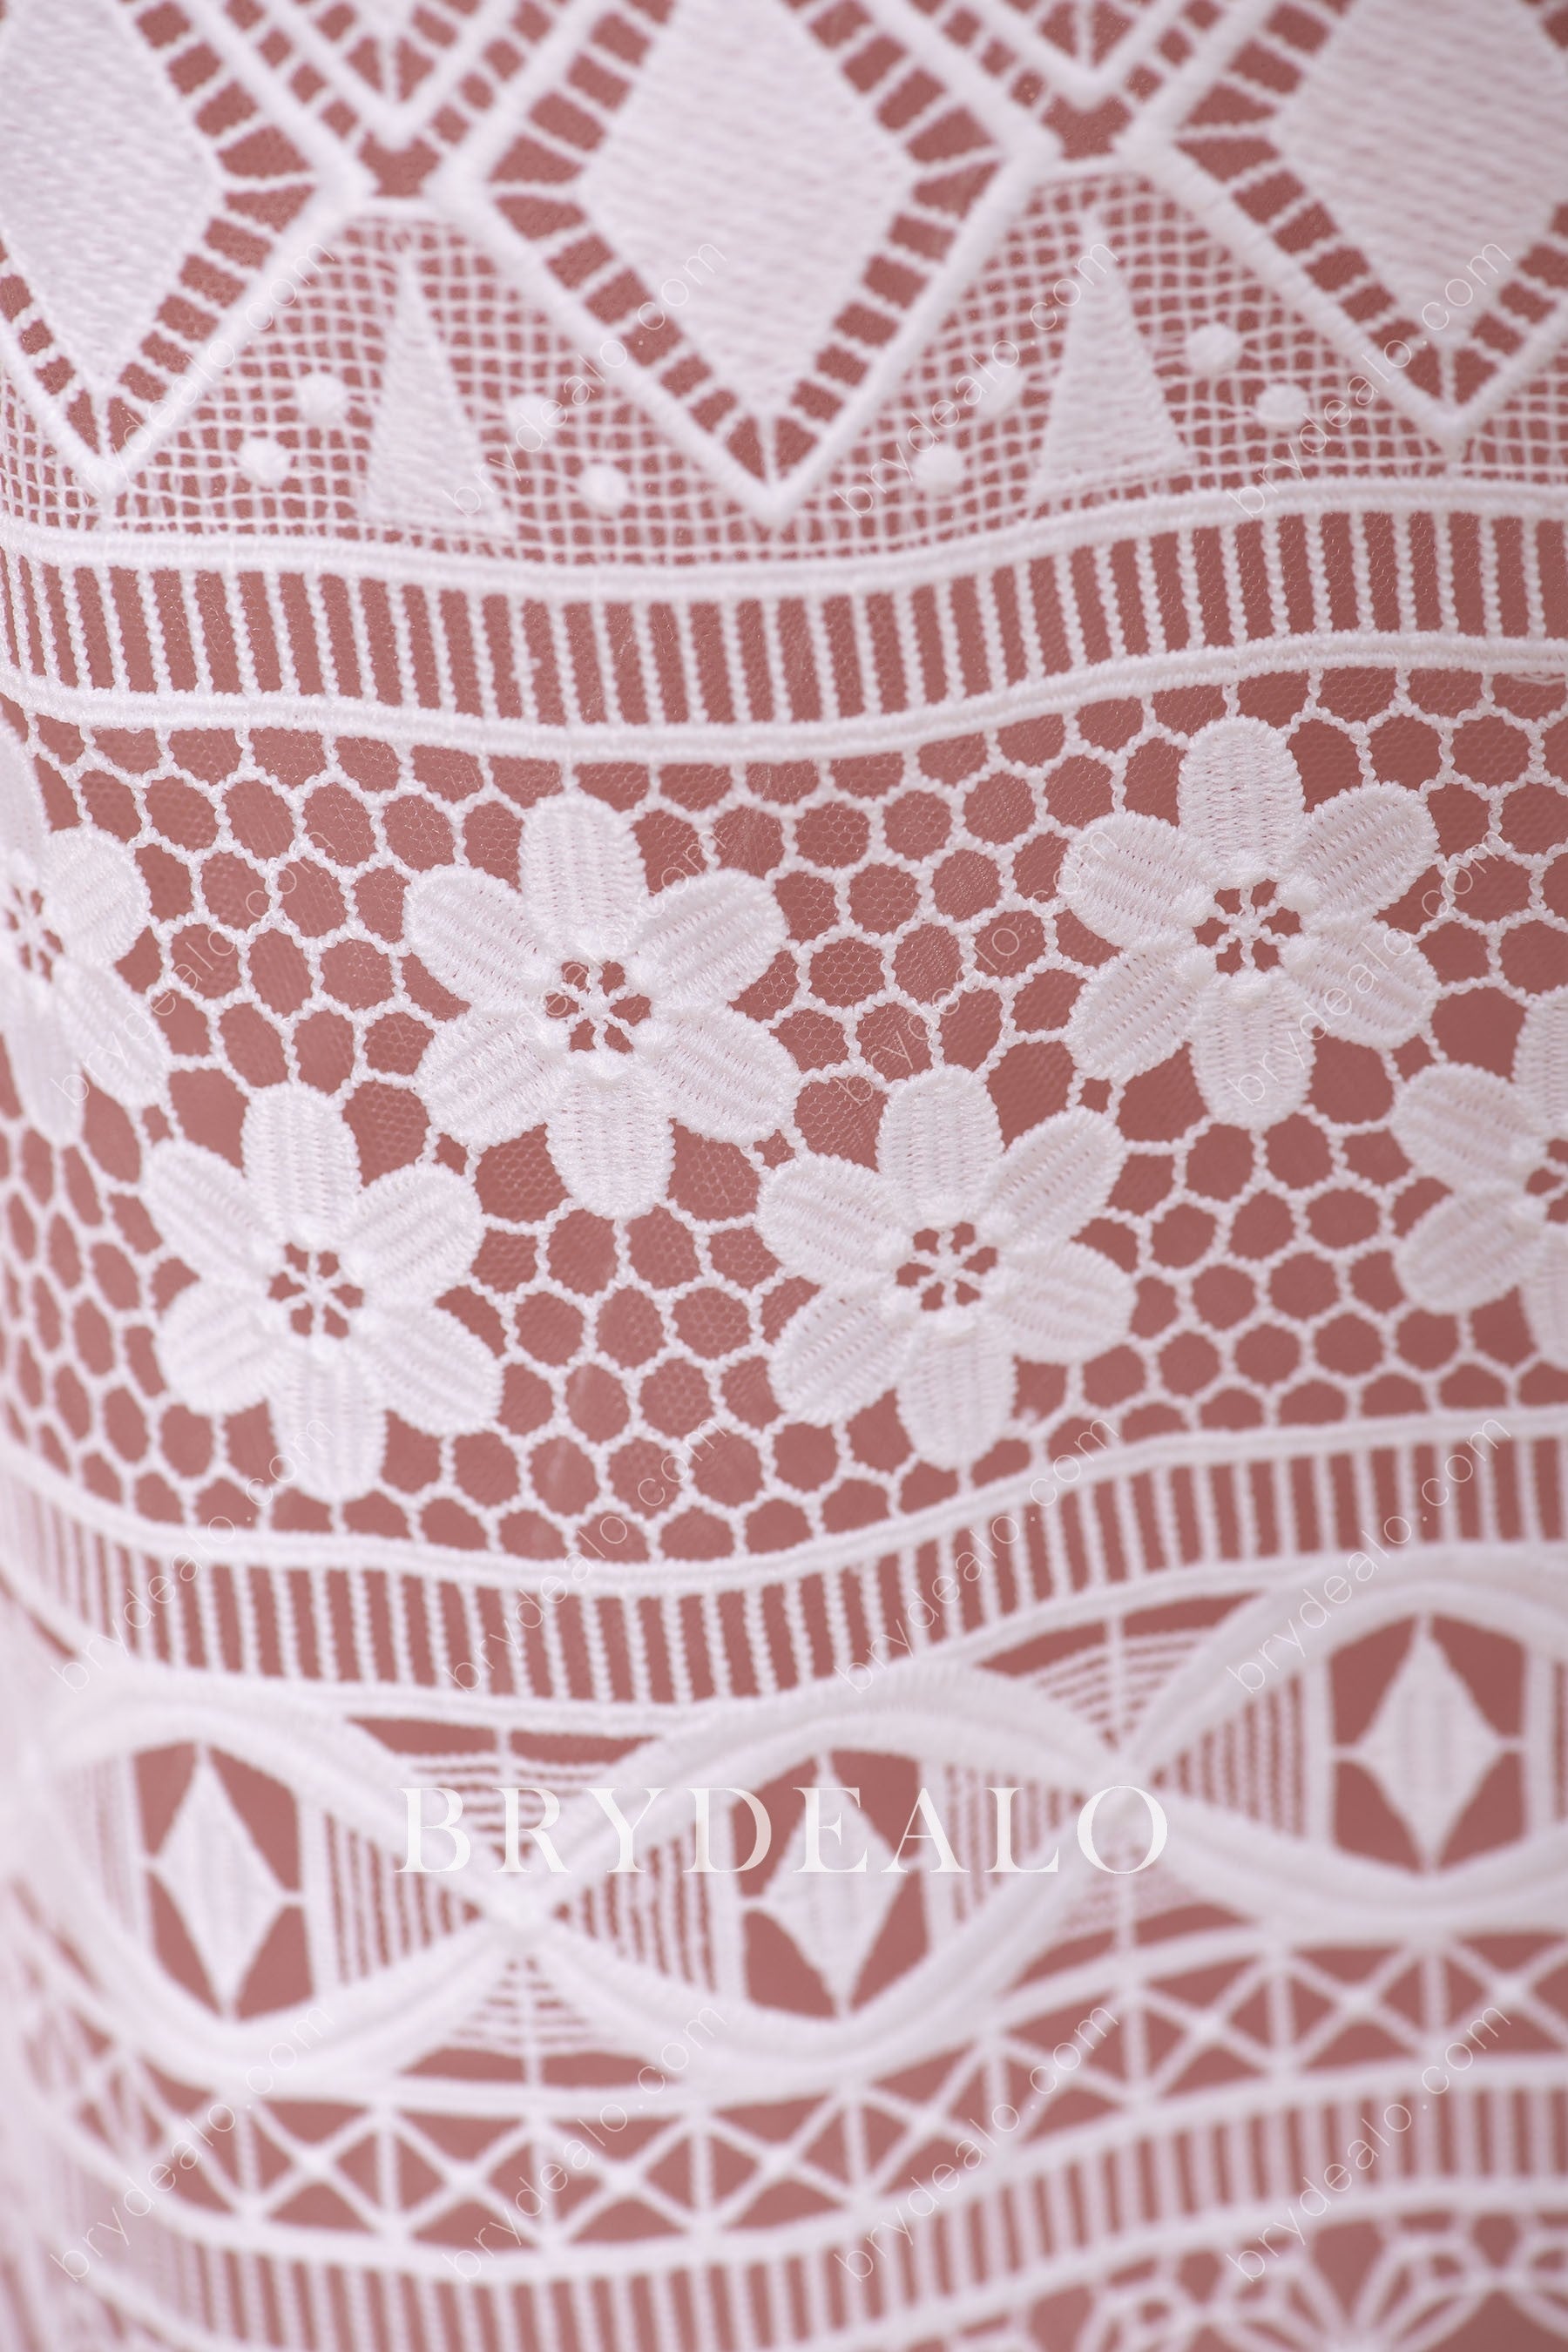  Border Patterned Crochet Lace Fabric